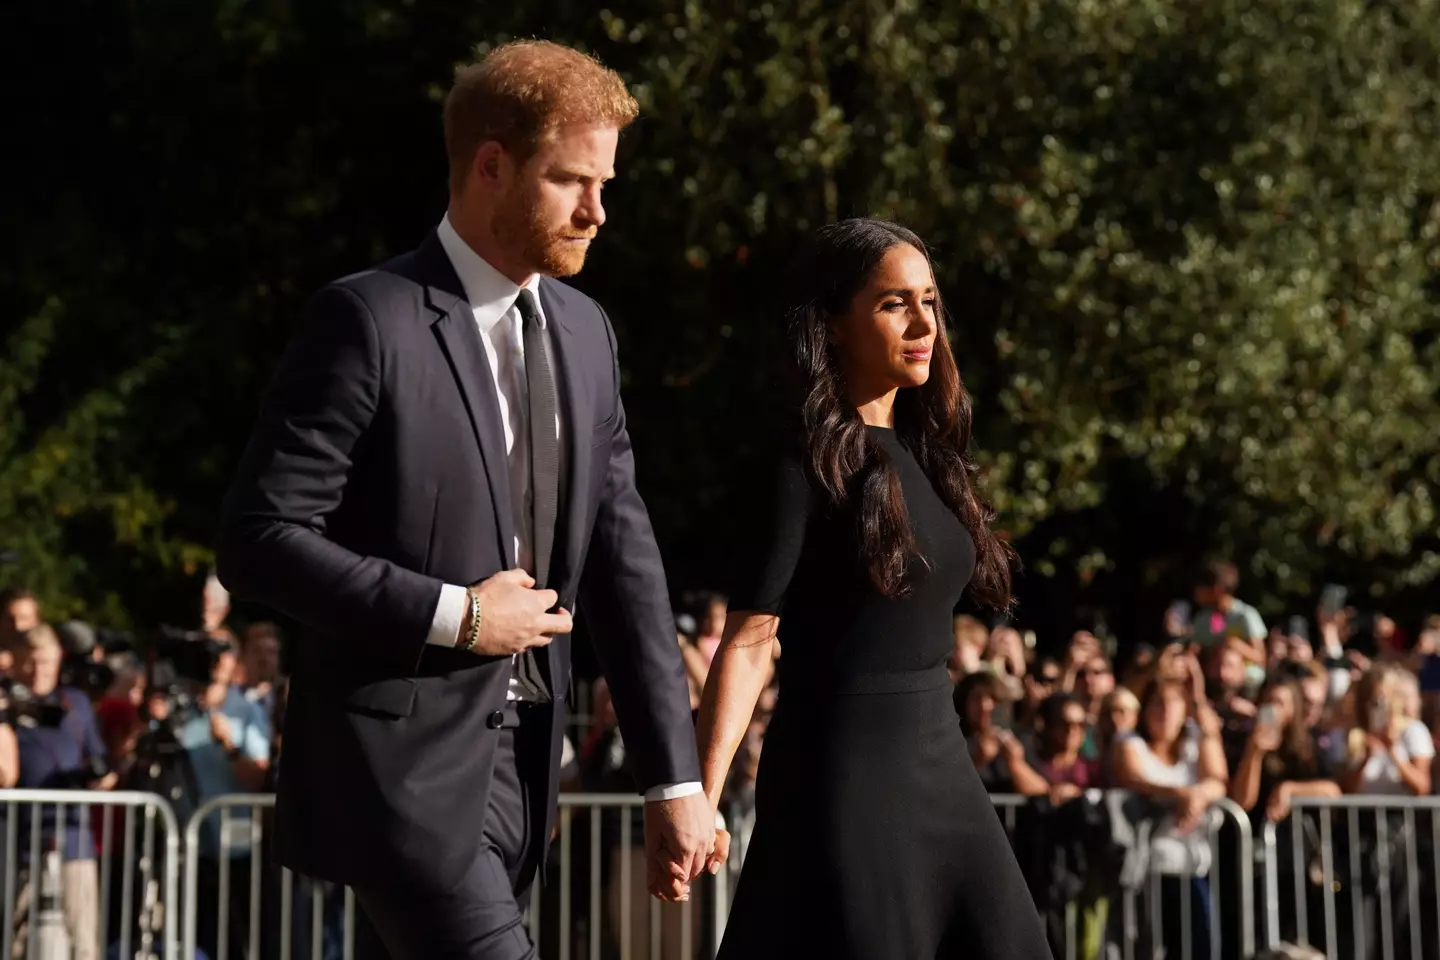 The Duke and Duchess of Sussex have issued a statement following the Queen's death.